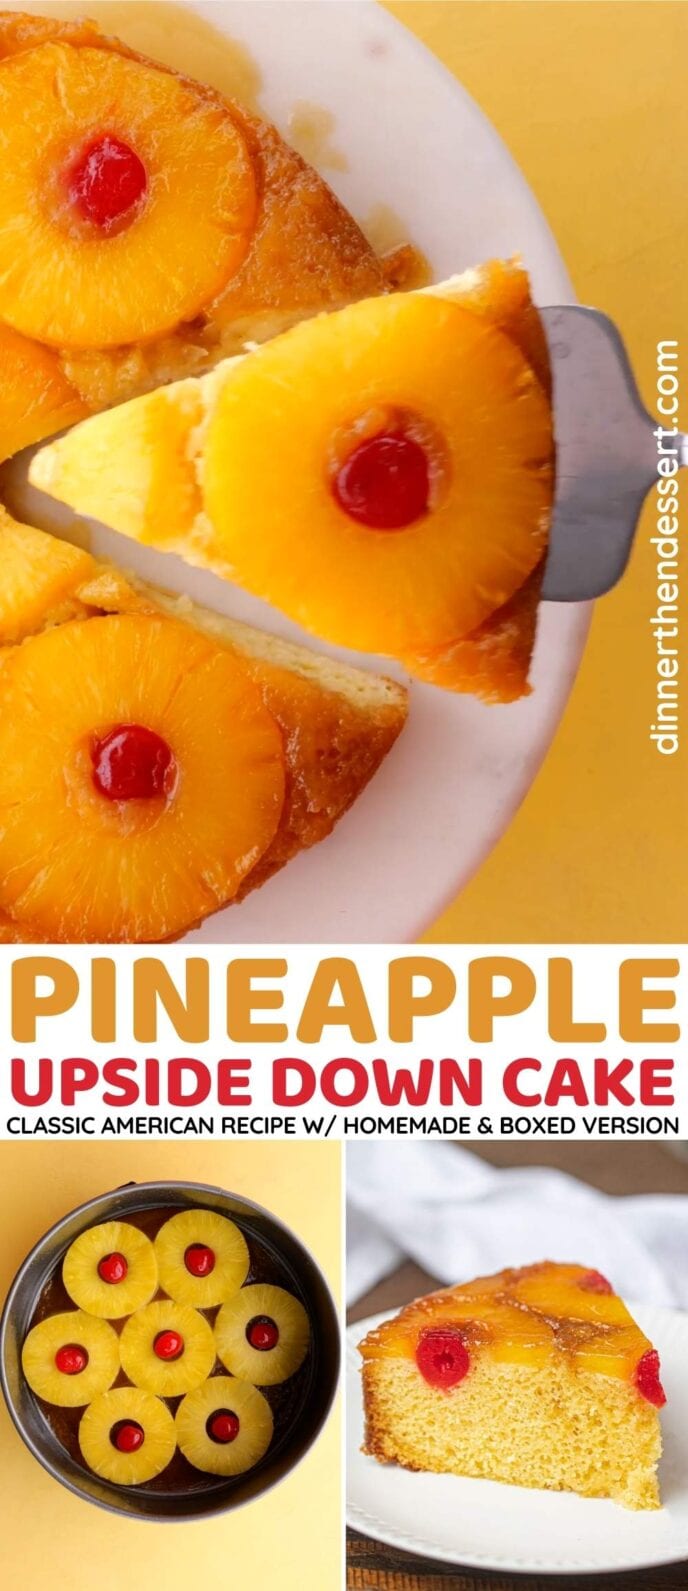 Pineapple Upside Down Cake Collage